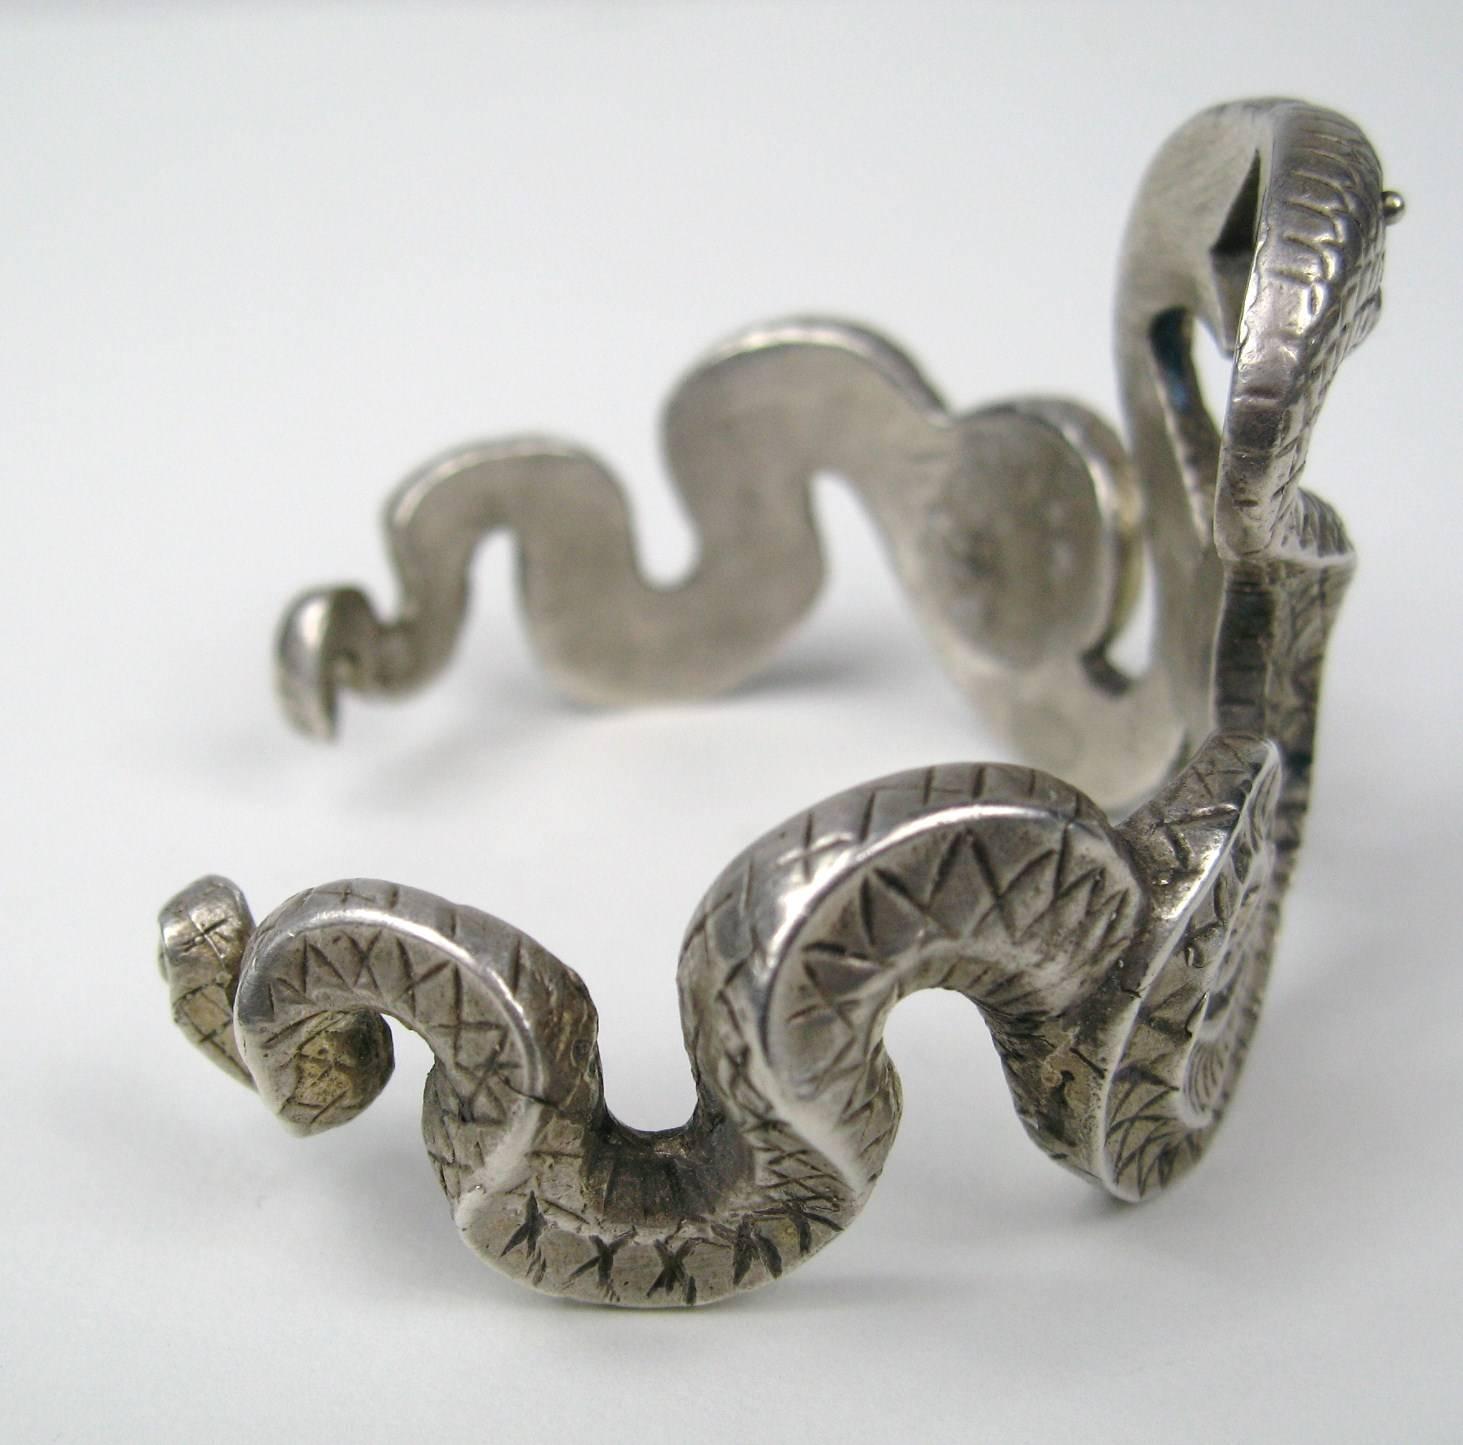 A large Sterling Silver Cuff Bracelet made up of two snakes headed from battle..Face to Face, ready to strike. This is a very cool bracelet. Hallmarked sterling silver inside the cuff.. 41 mm or 1.65 in at widest. The inner circumference is 7 in and